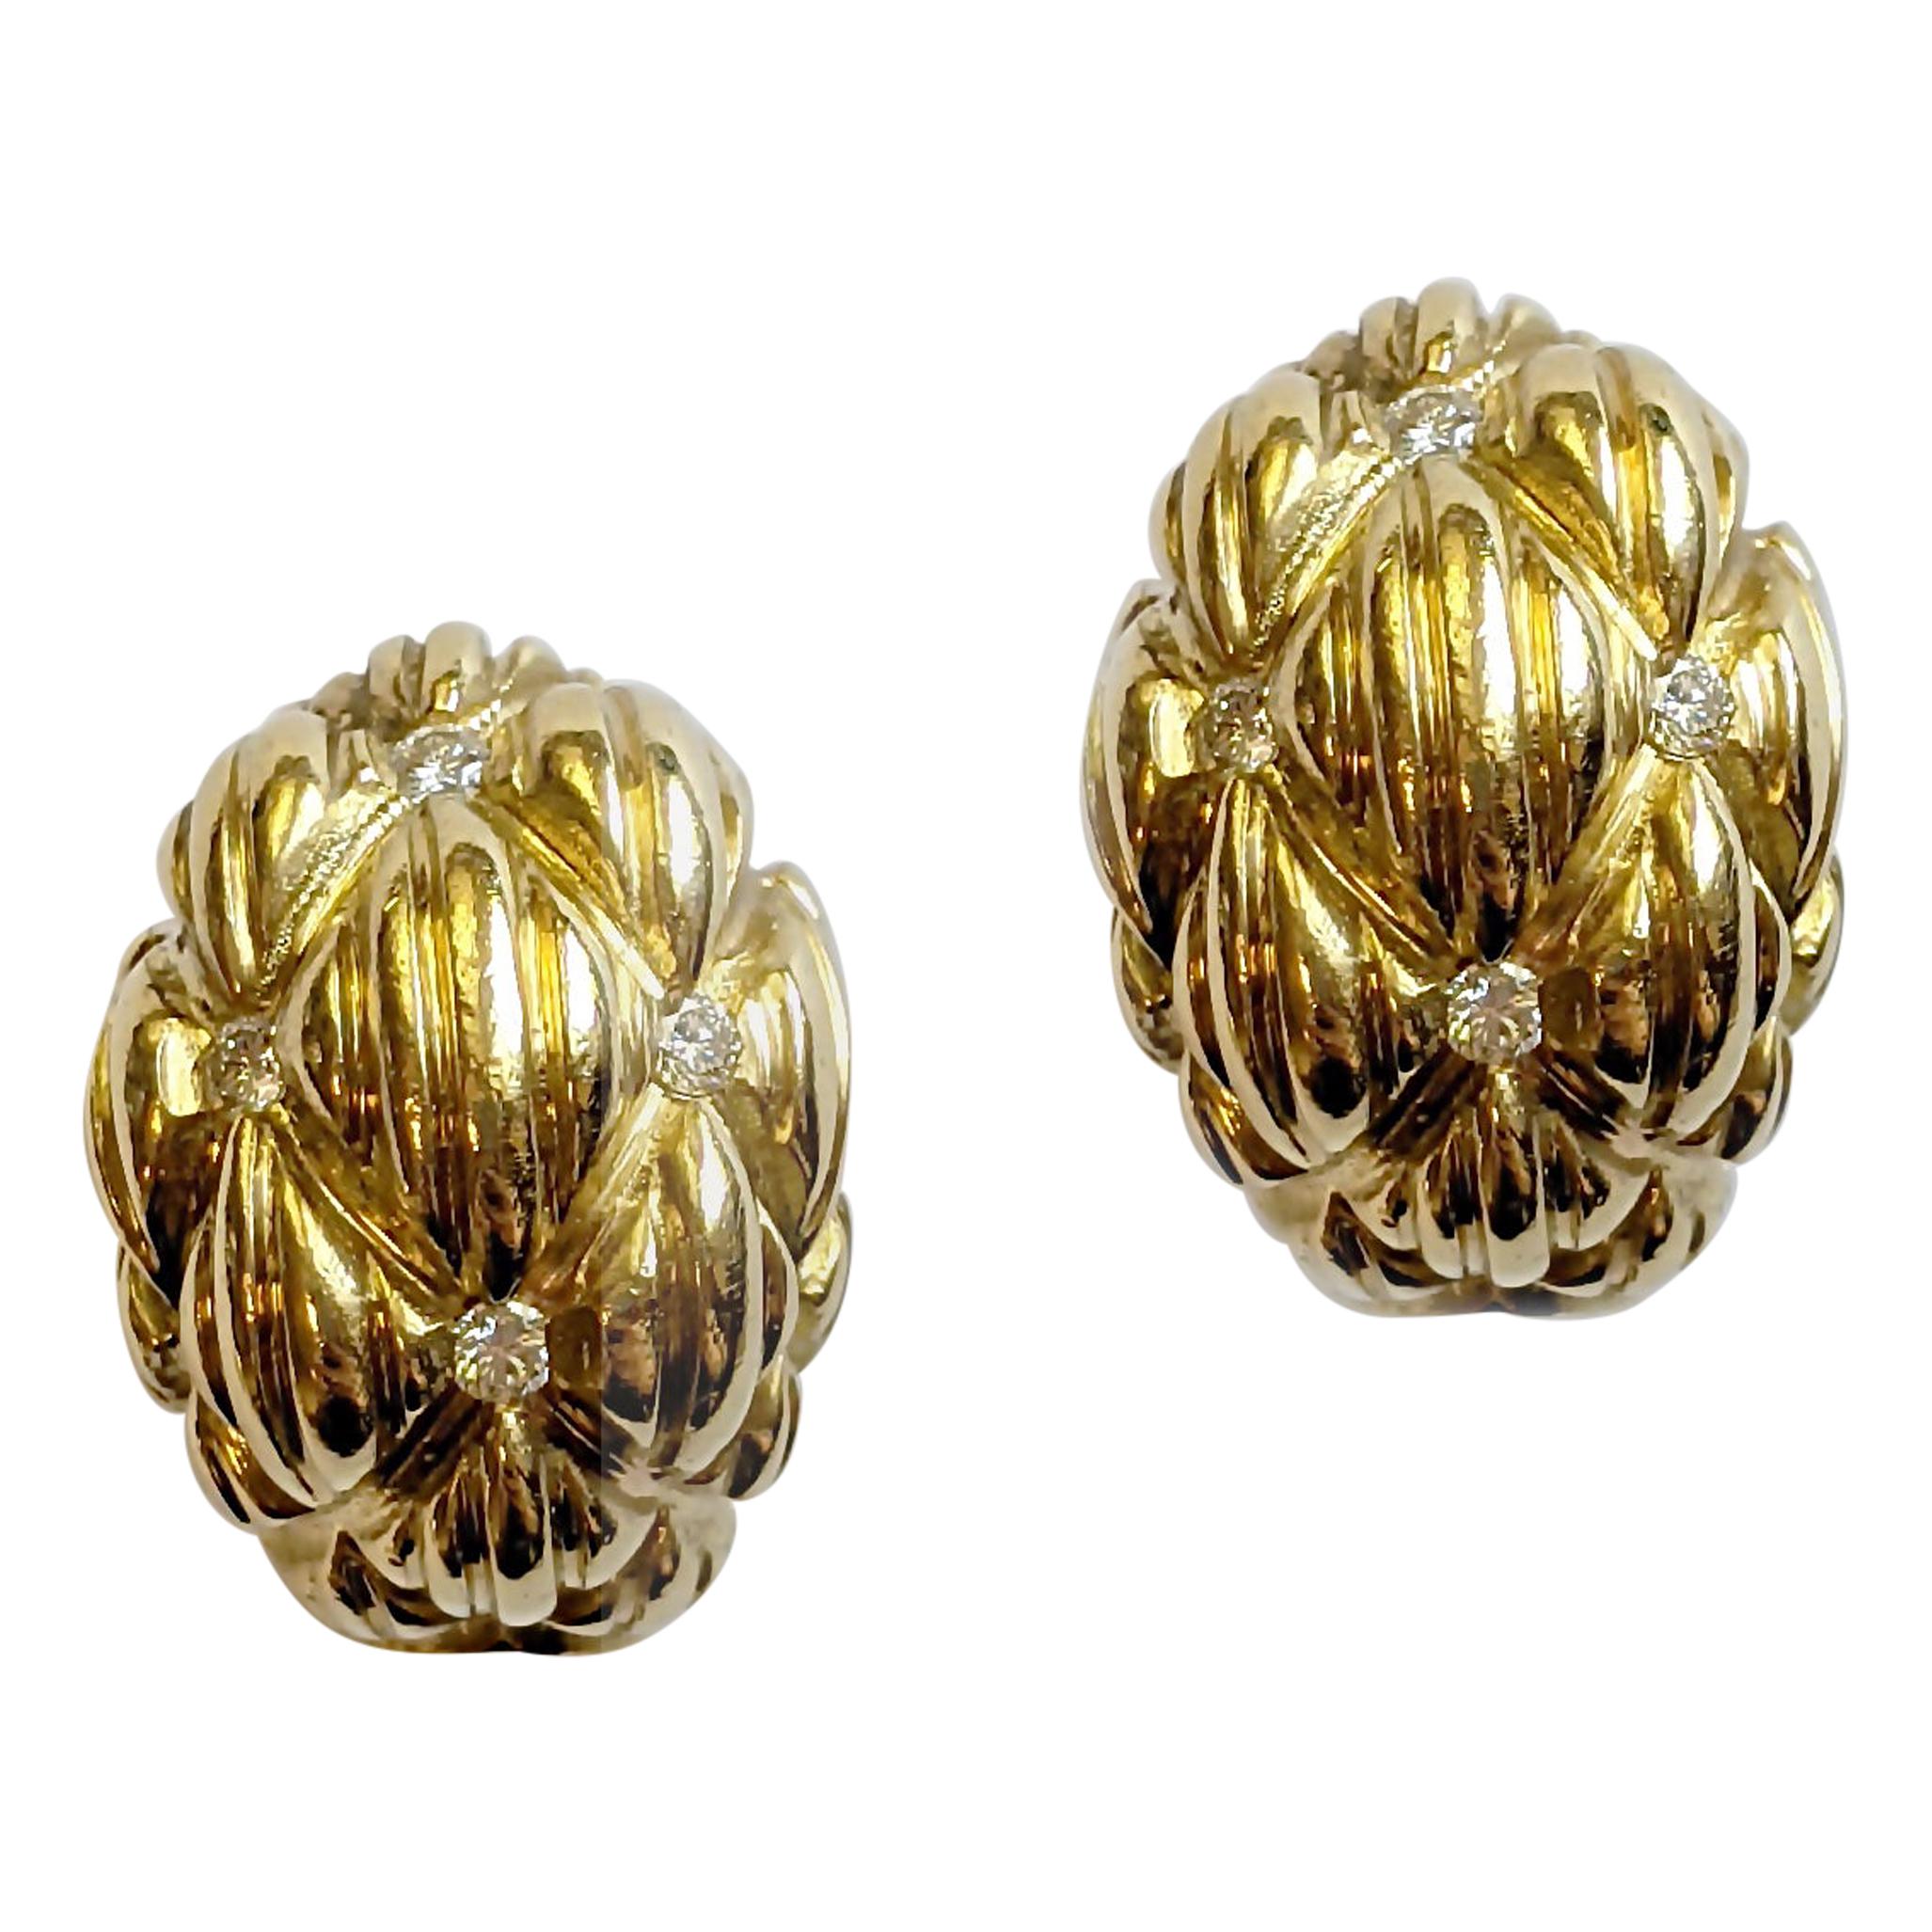 Retro Yellow Gold-Topped Sterling Silver Earrings with Diamonds